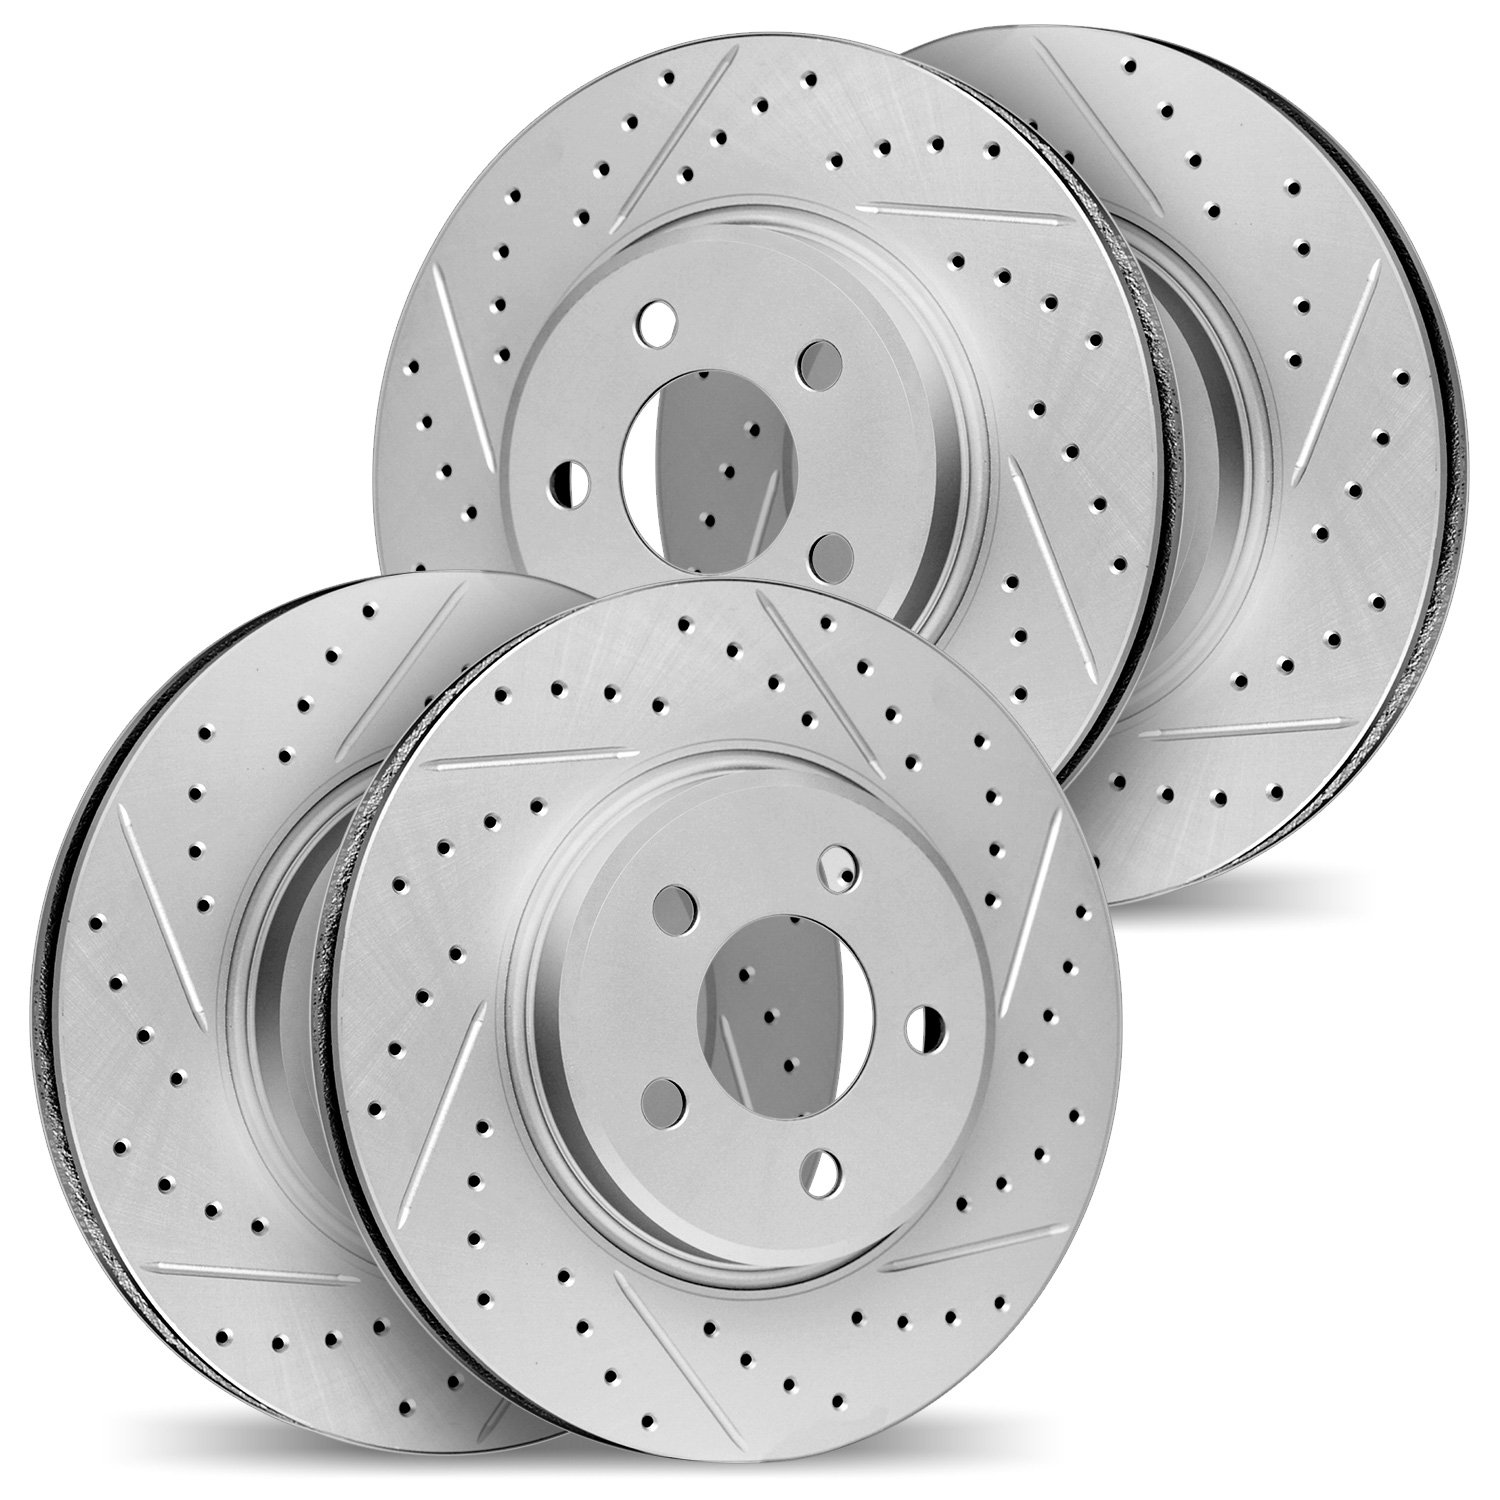 2004-74008 Geoperformance Drilled/Slotted Brake Rotors, 2006-2013 Audi/Volkswagen, Position: Front and Rear